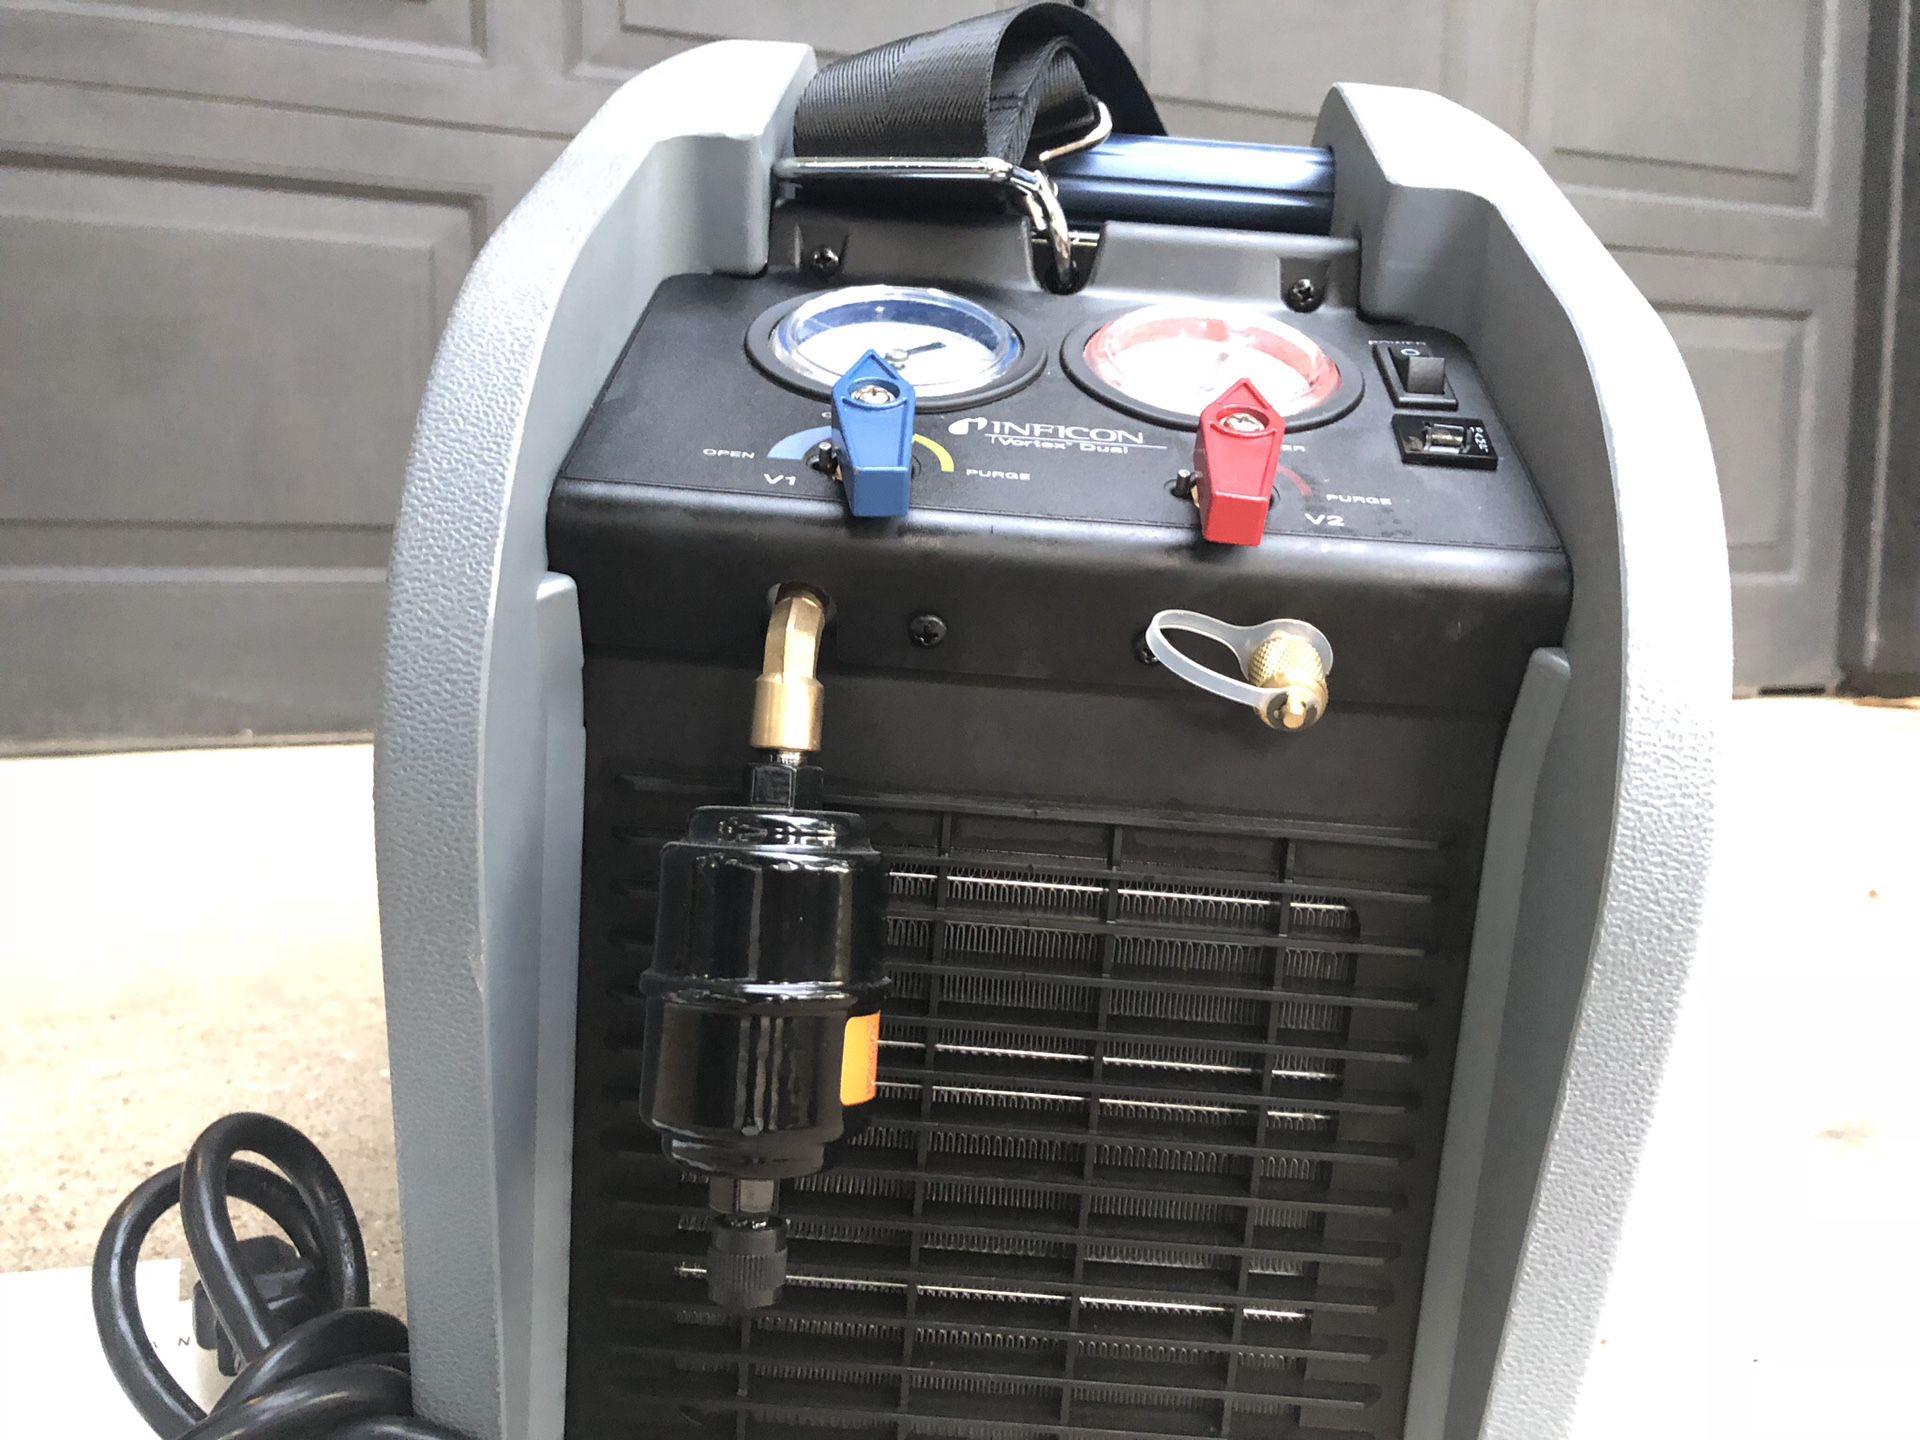 Inficon 714-202-G1 Vortex Dual Refrigerant Recovery Machine, HP, 120V for  Sale in Plano, TX OfferUp